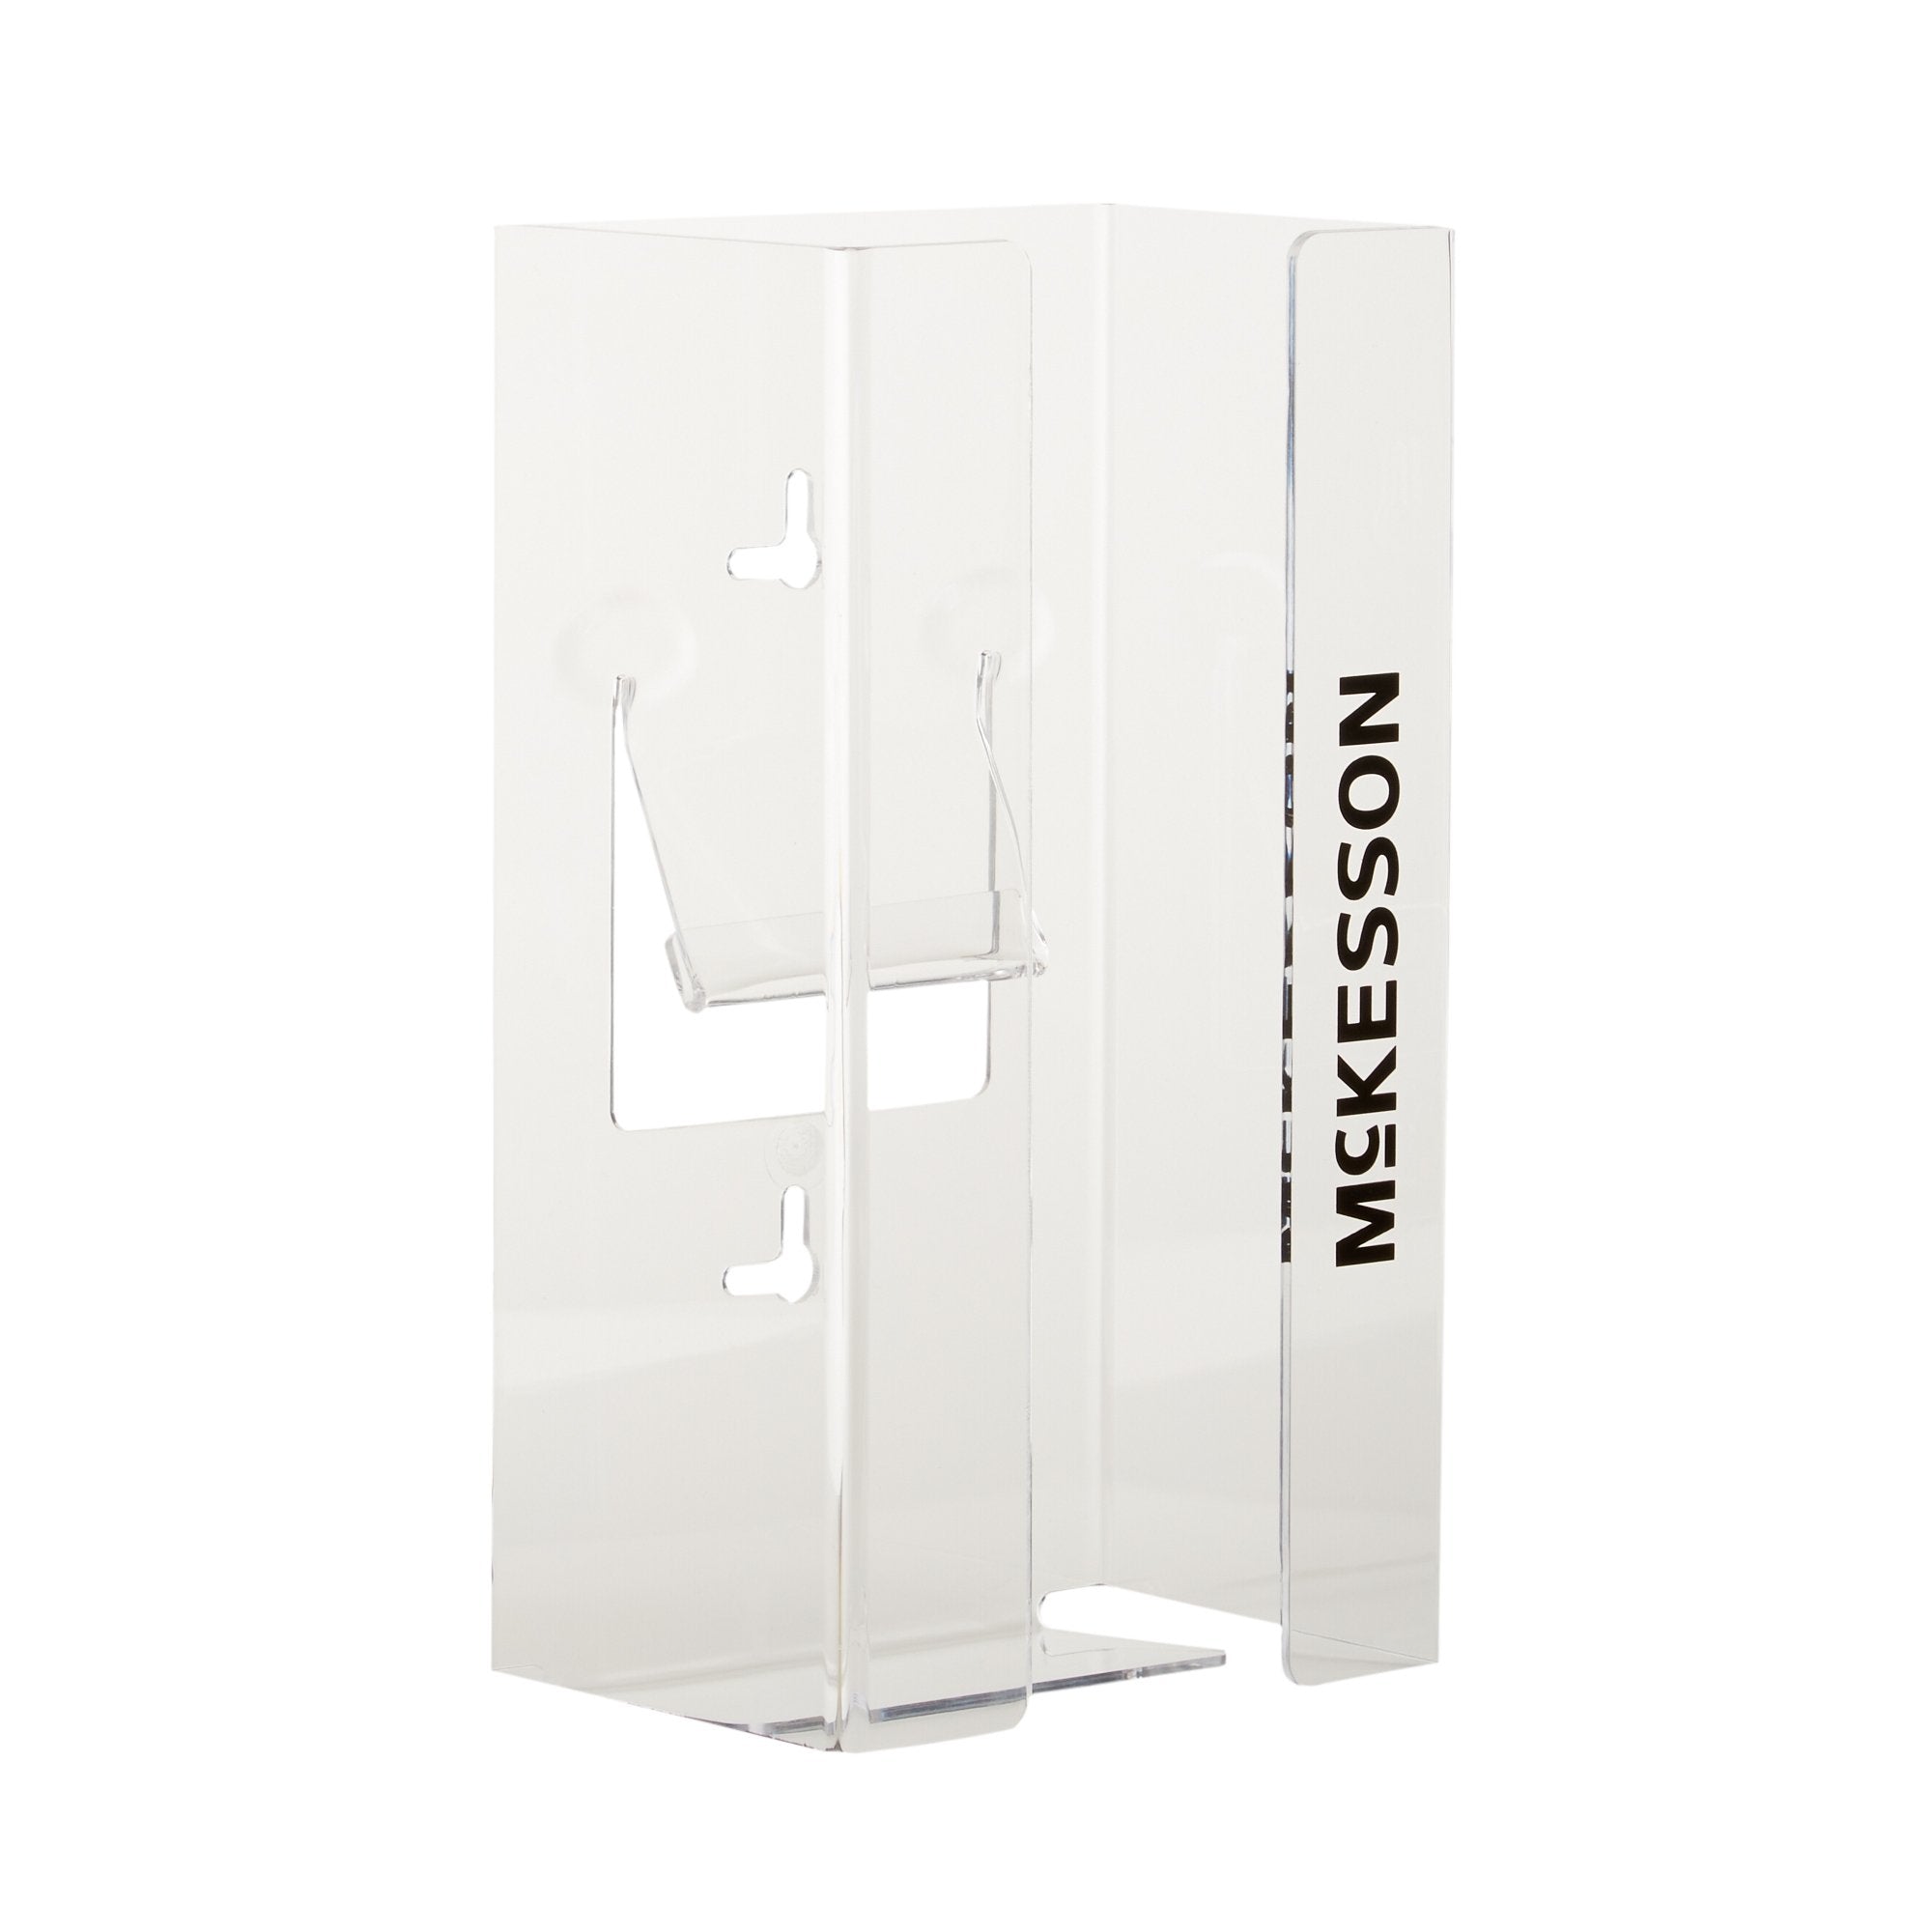 Glove Box Holder McKesson Horizontal or Vertical Mounted 1-Box Capacity Clear 4 X 5-1/2 X 10 Inch Plastic